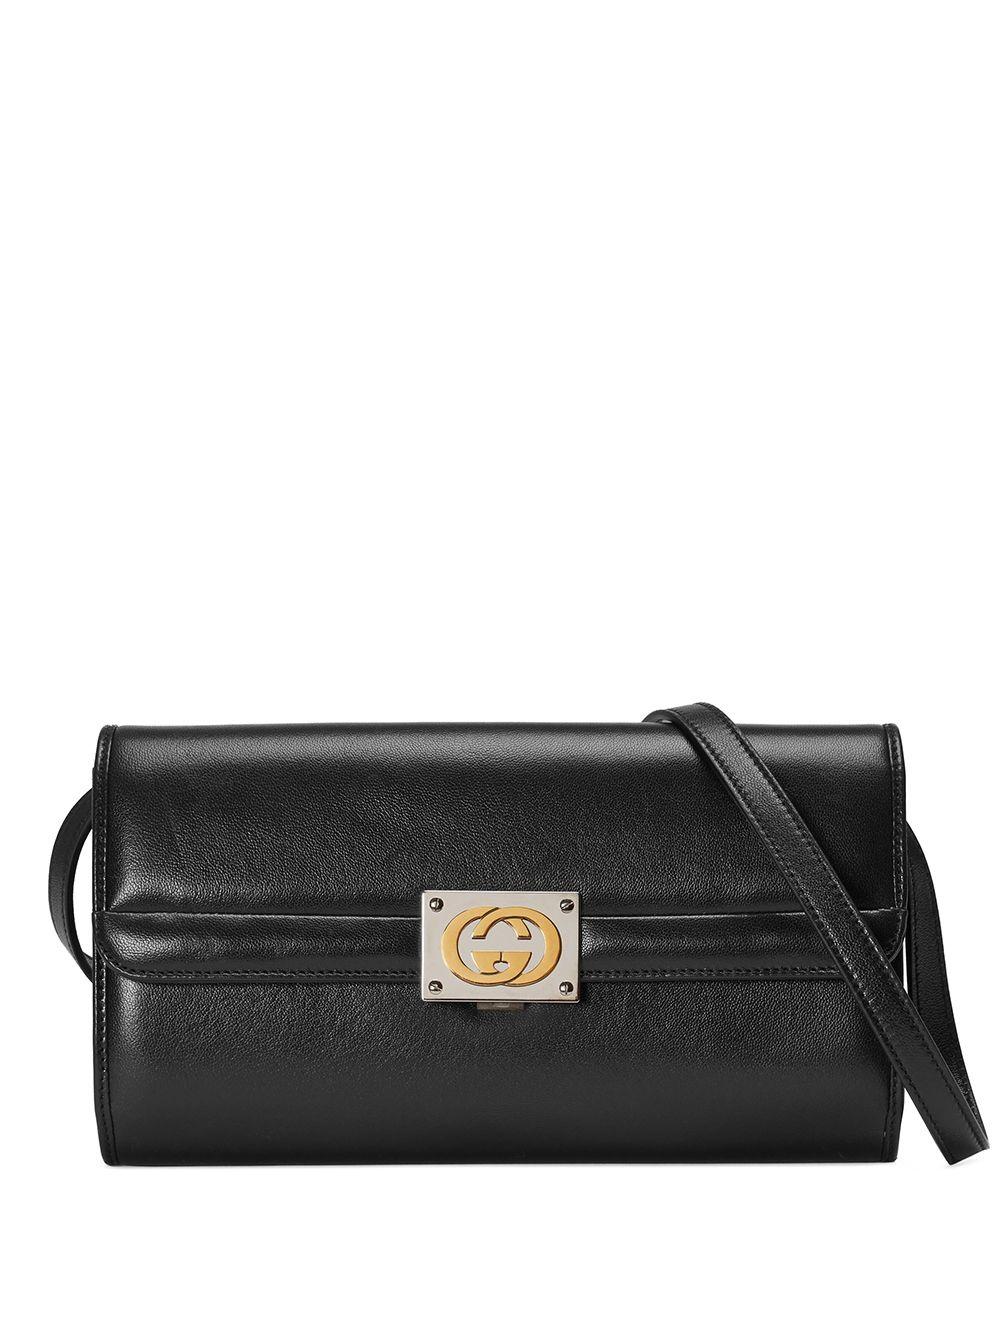 SALE! NWT Gucci Linea Matisse black leather small shoulder bag. Rtl $1980